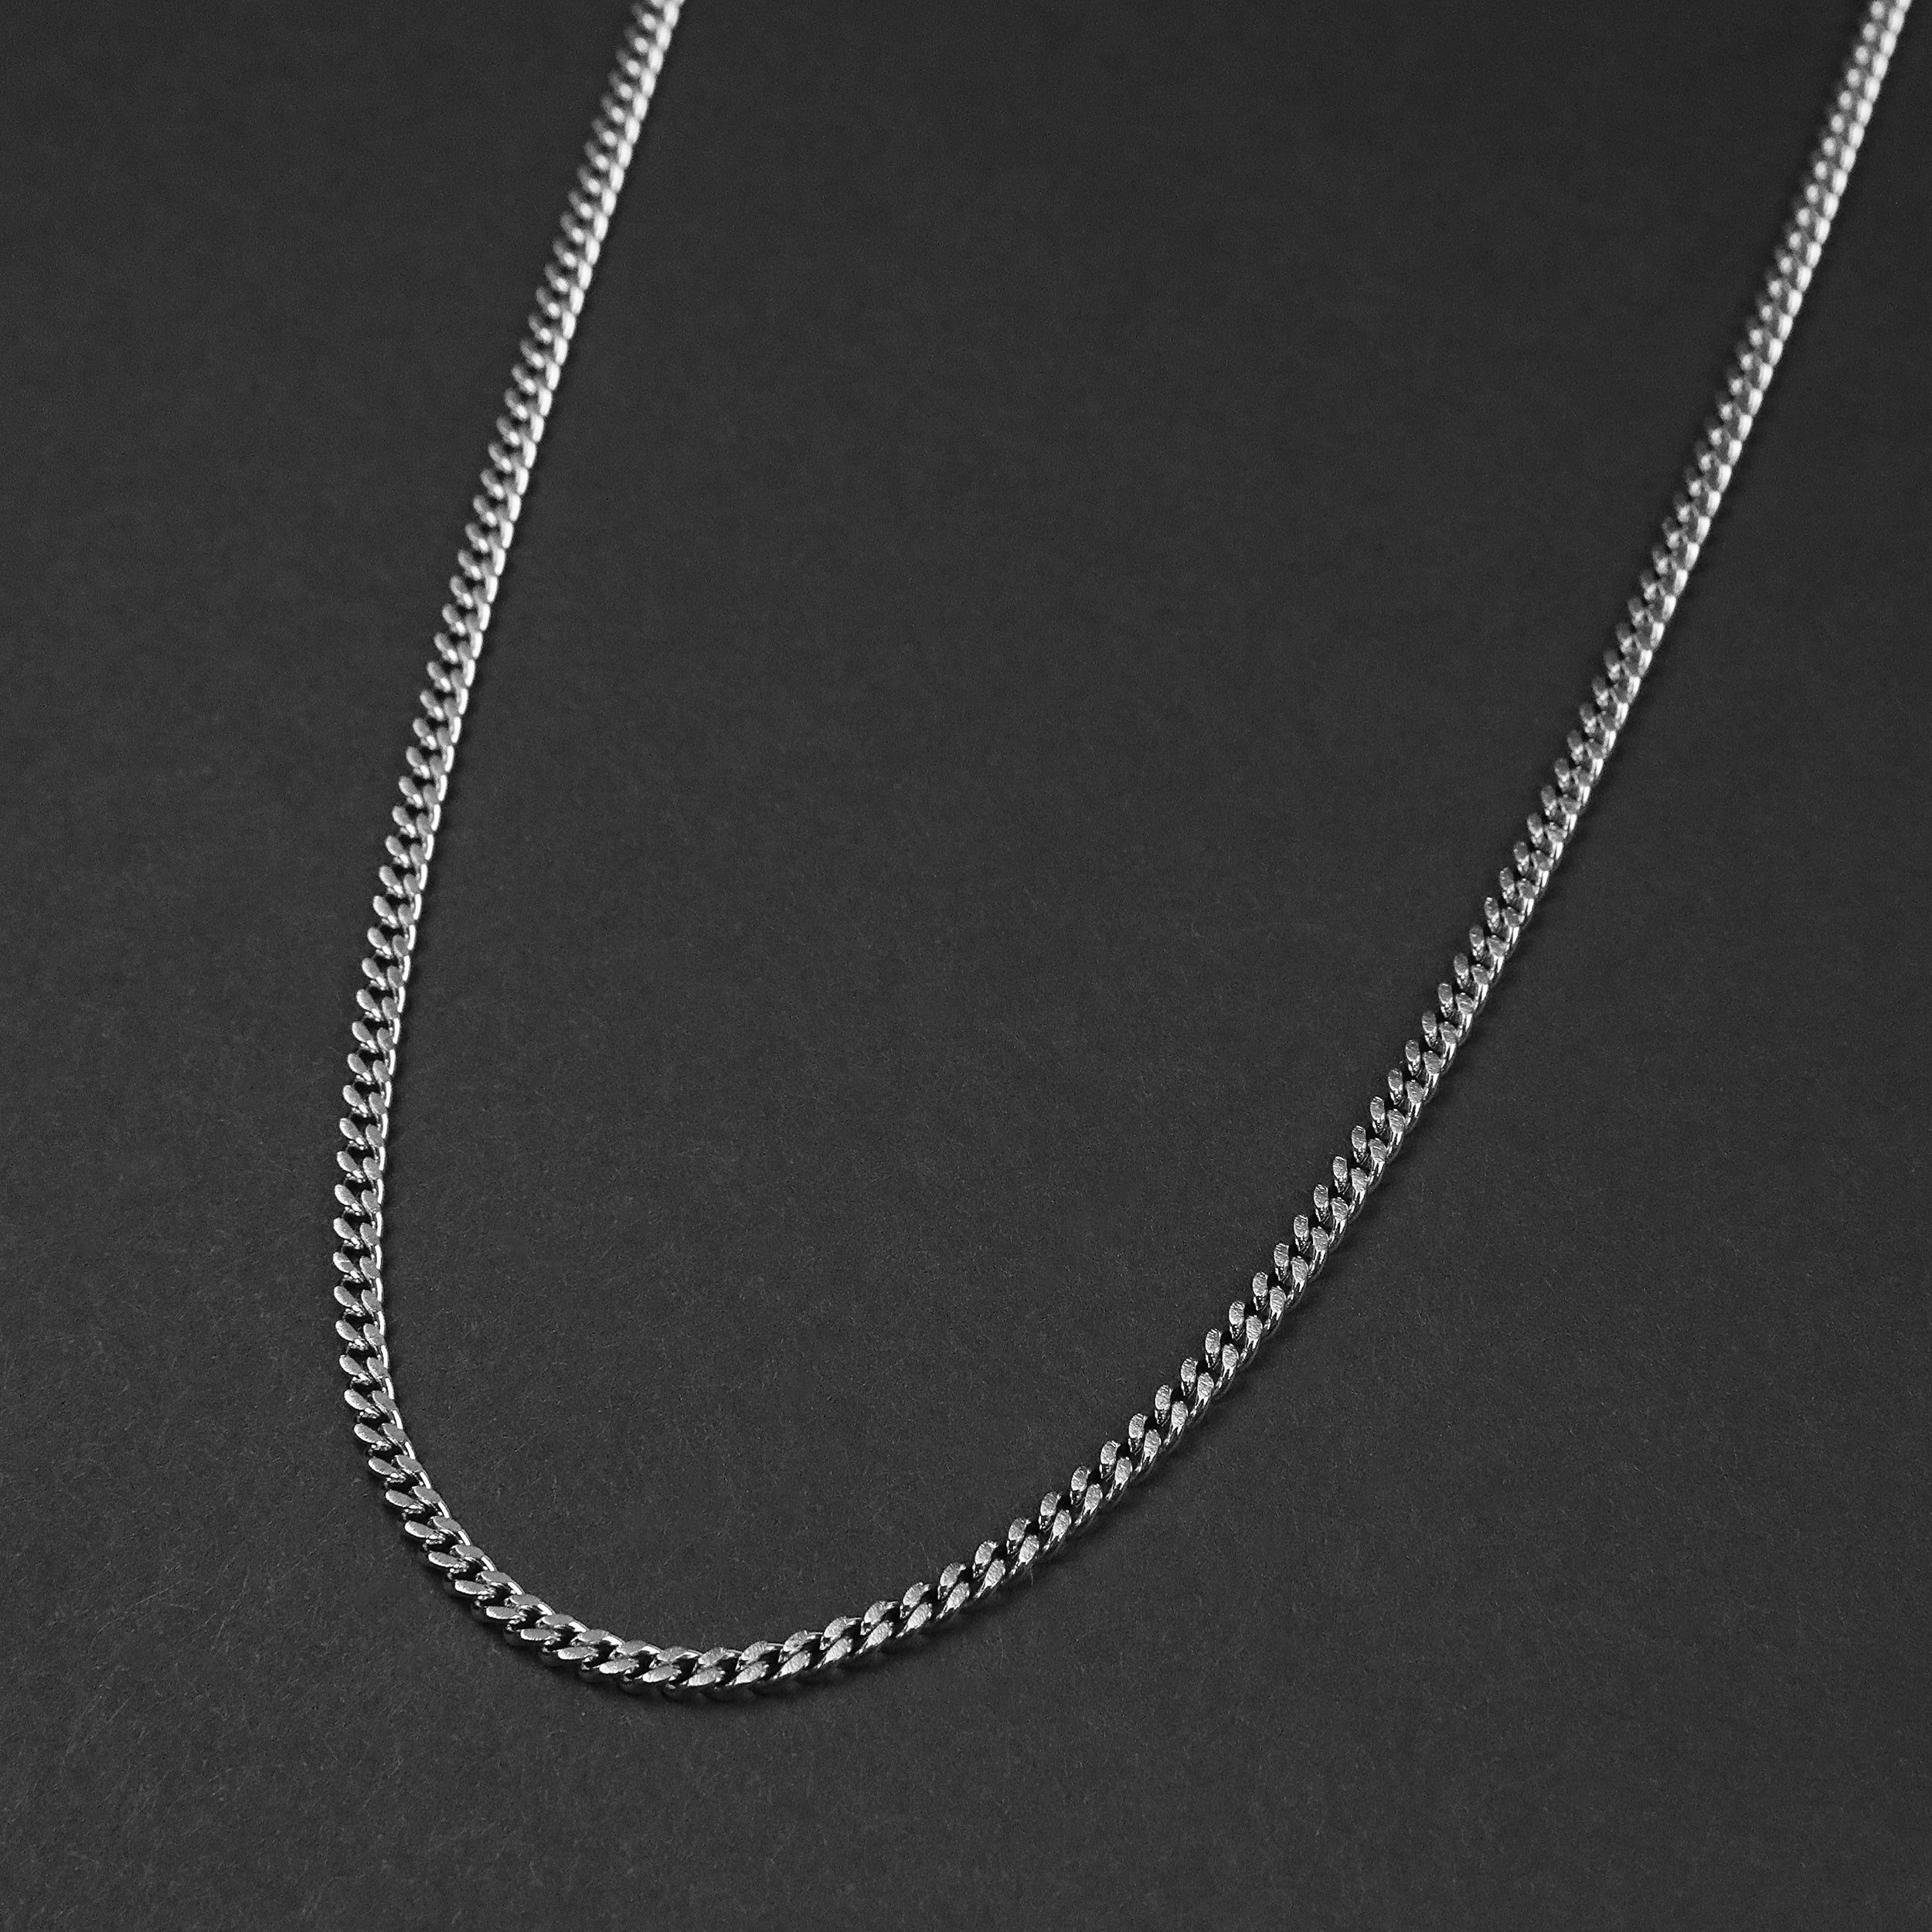 Personalized Cuban Chain - Silver 3mm